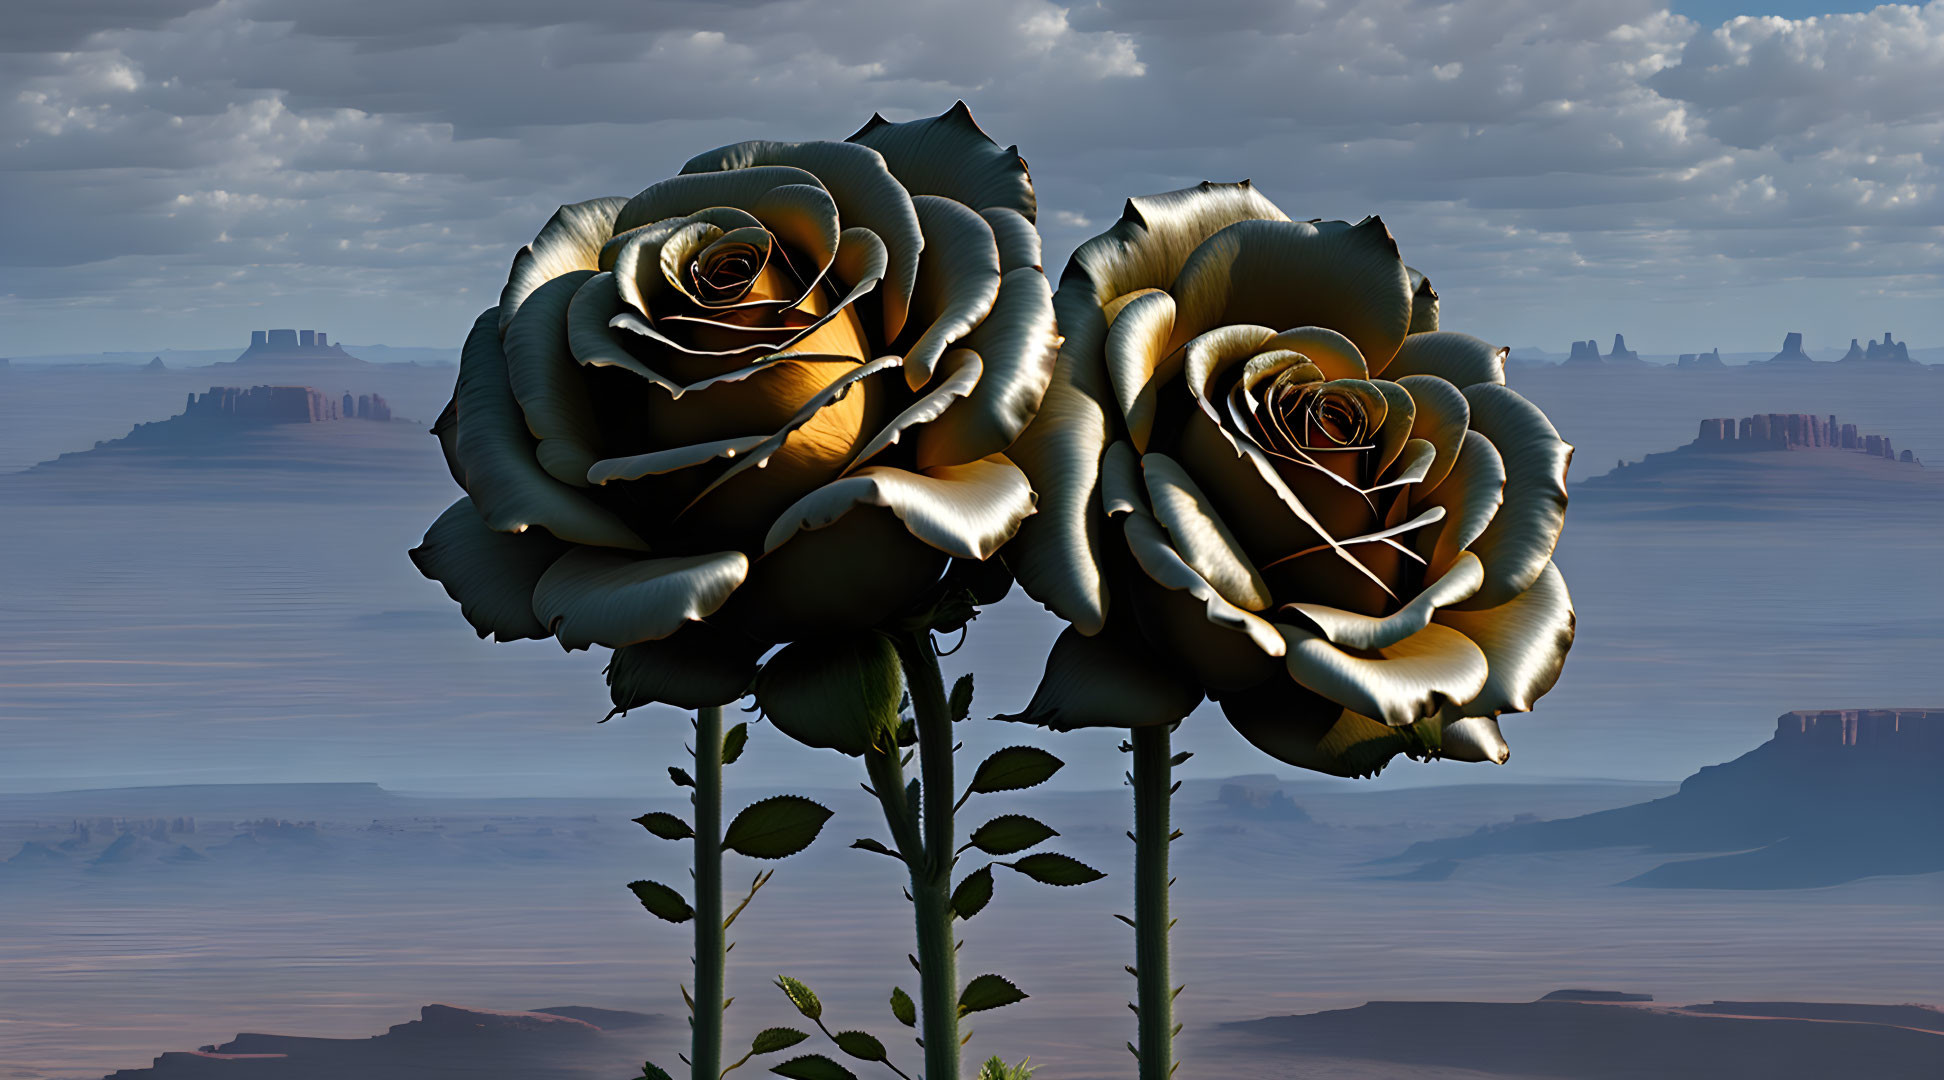 Gold-Tinted Roses in Desert Landscape with Mesas and Cloudy Sky